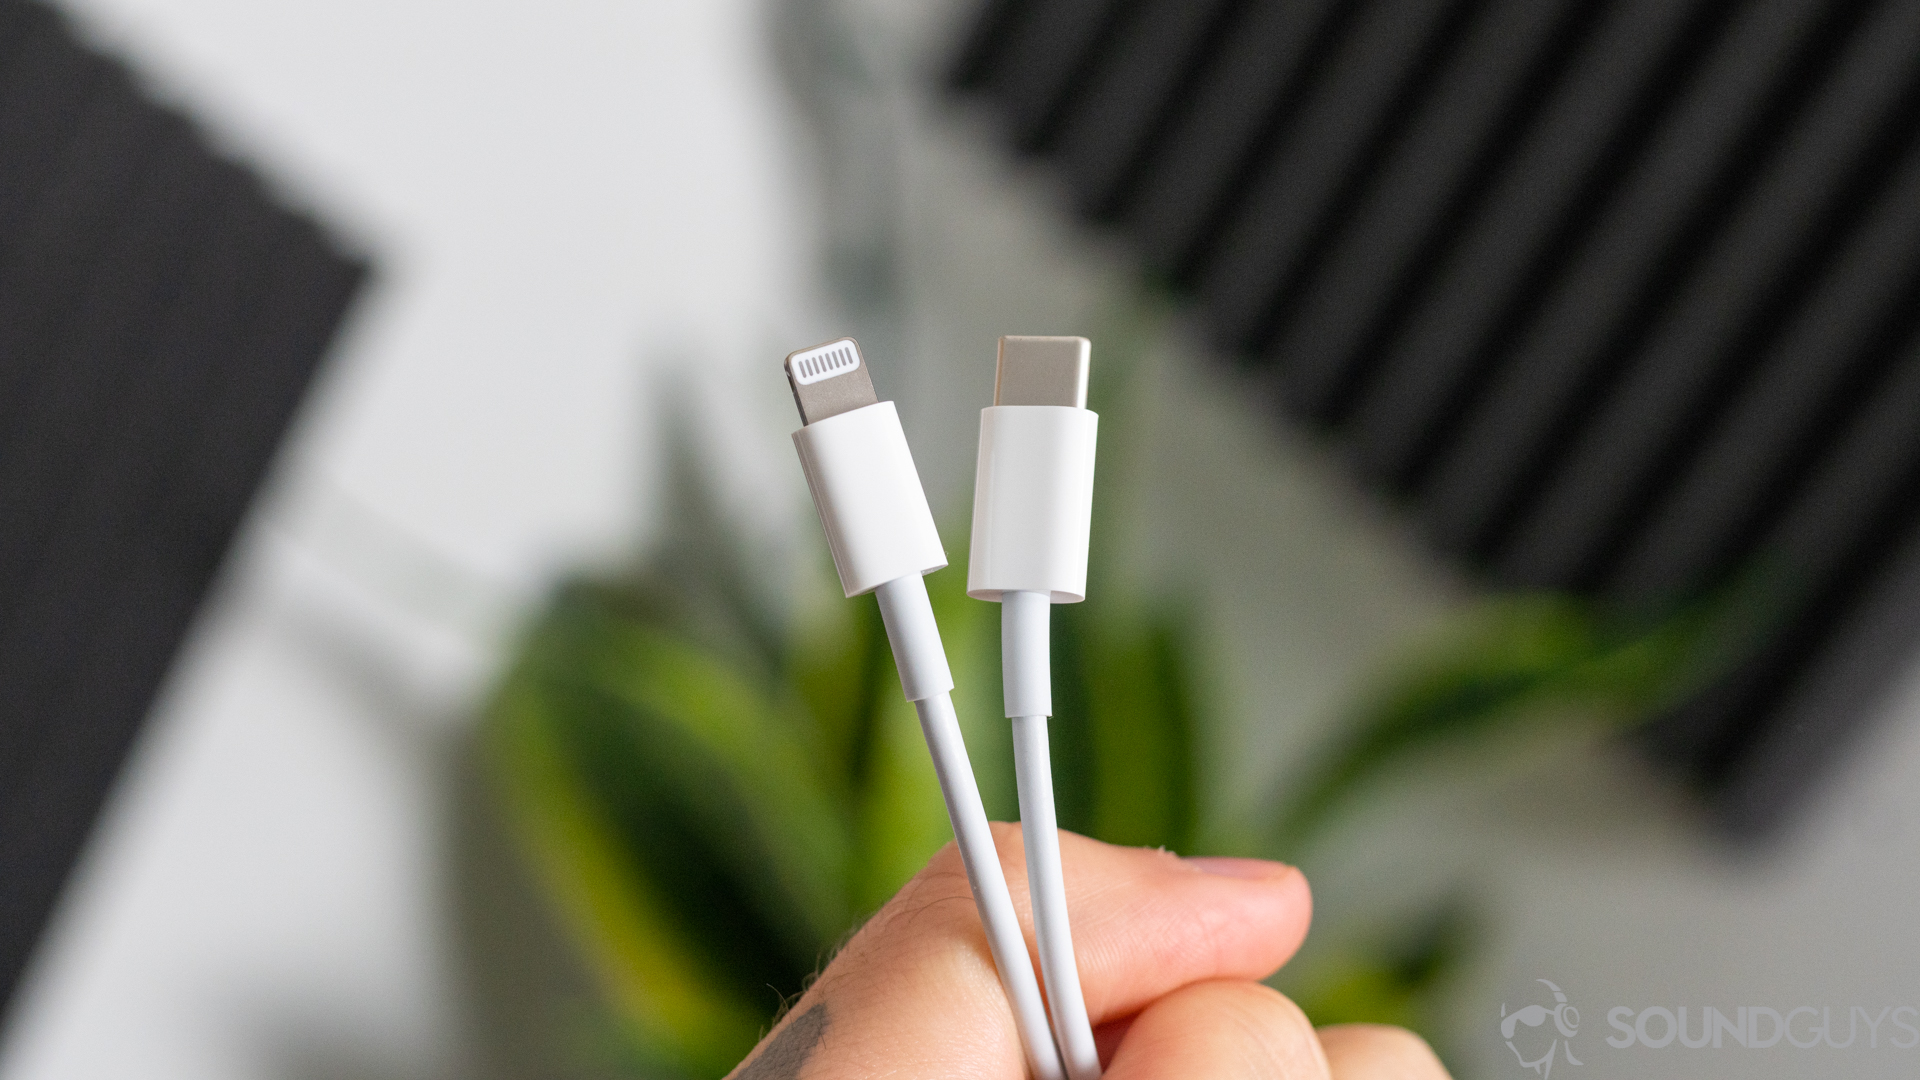 The AirPods Pro Lightning charging cable in front of a plant.